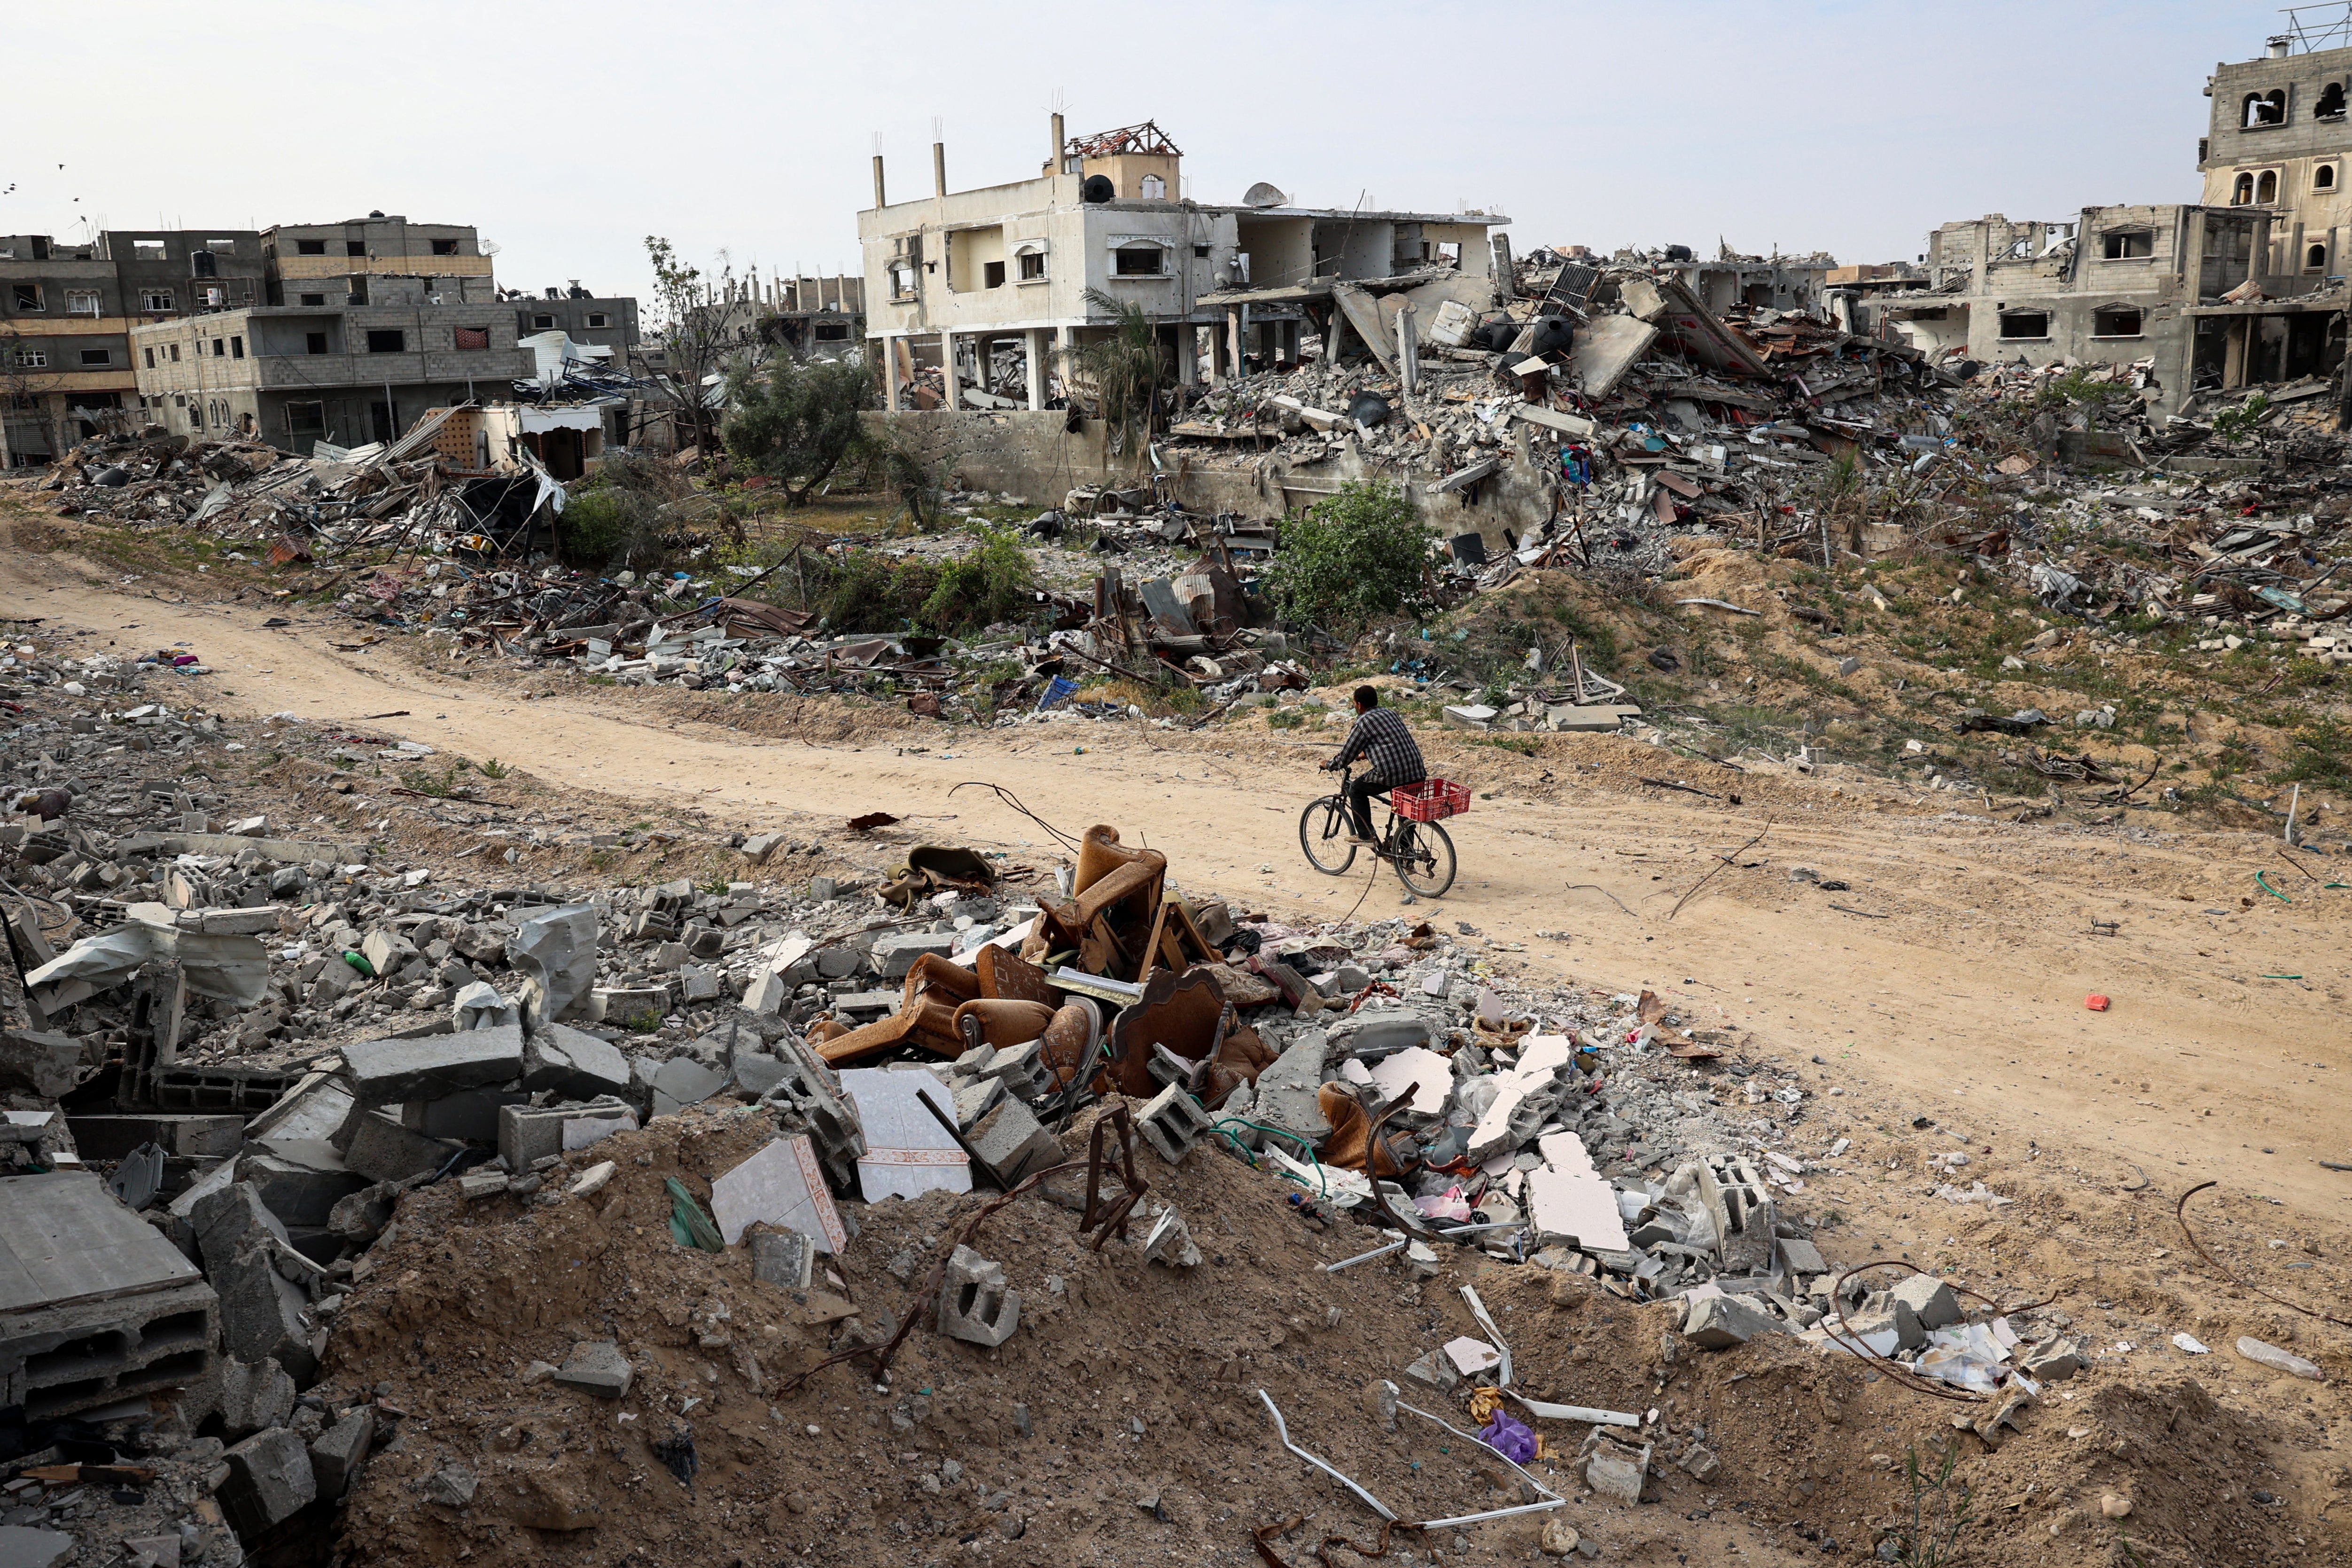 The devastation of Khan Younis following Israel pulling their troops from the city